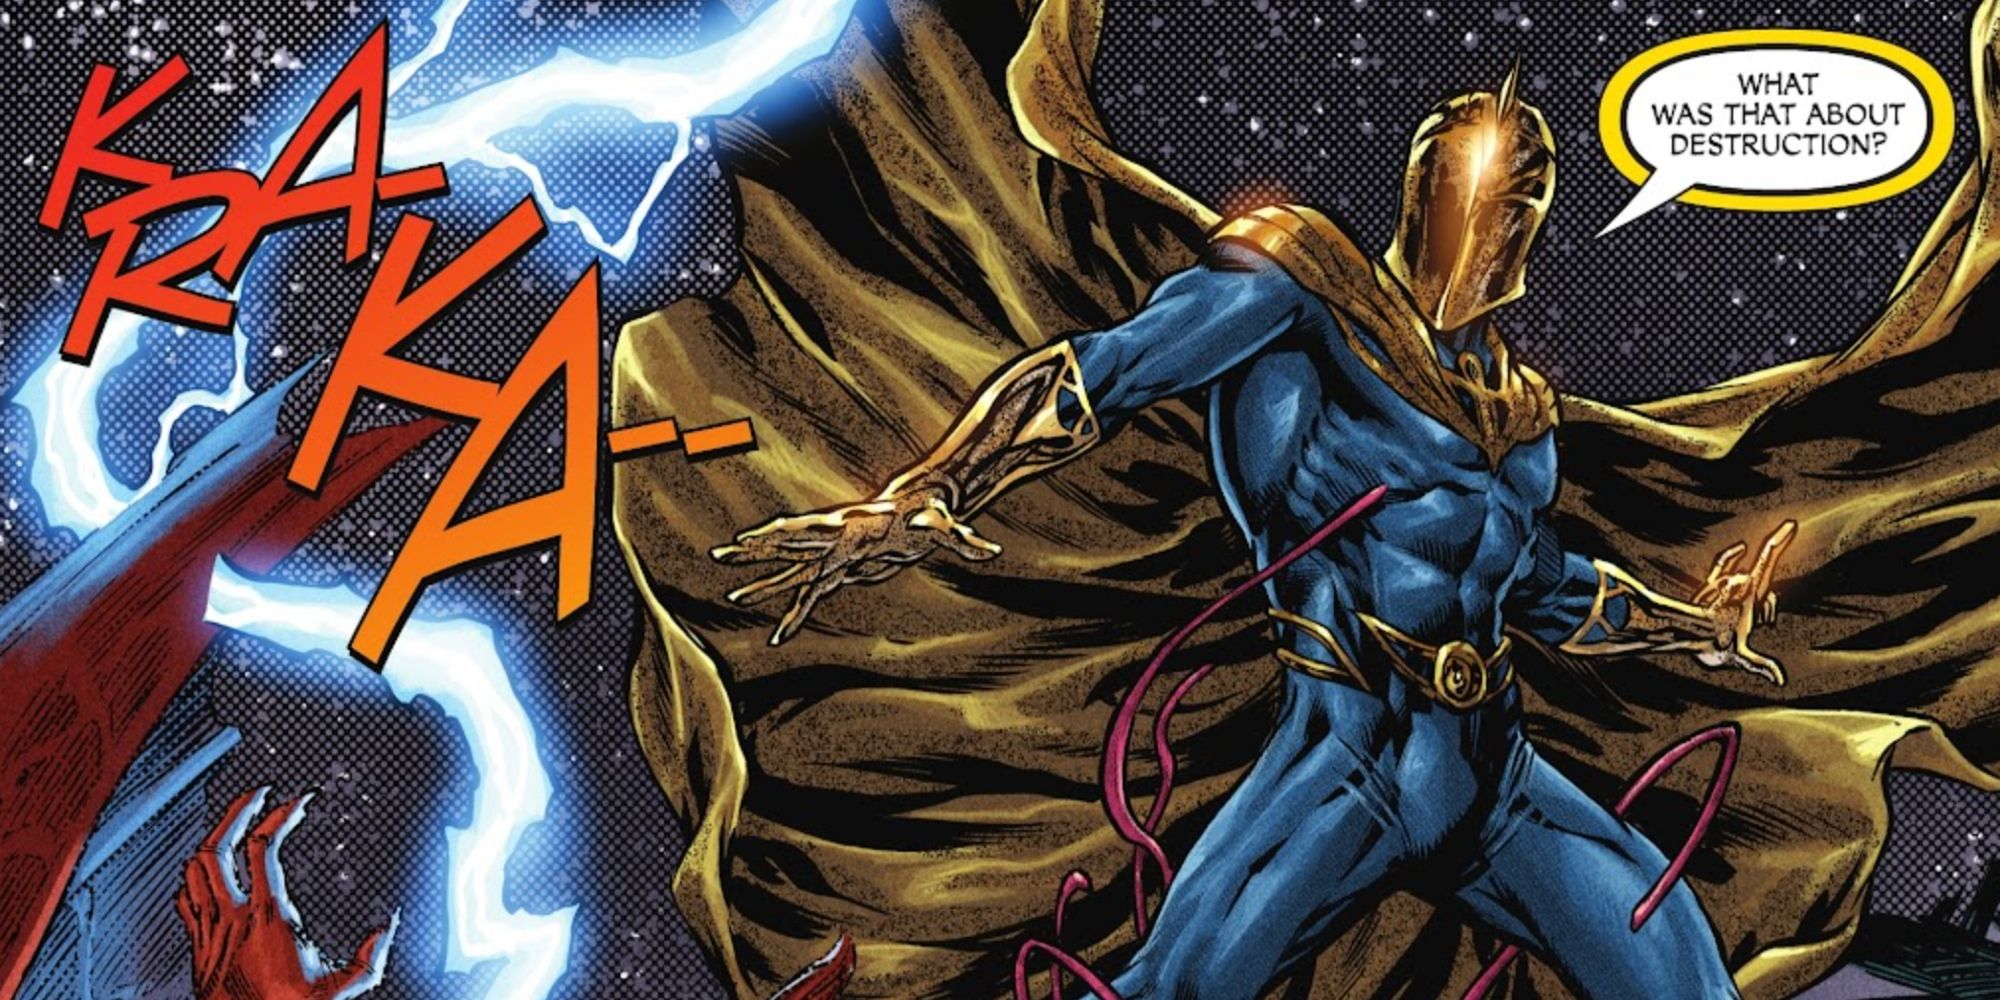 Doctor Fate summons lightning in The Justice Society Files #1